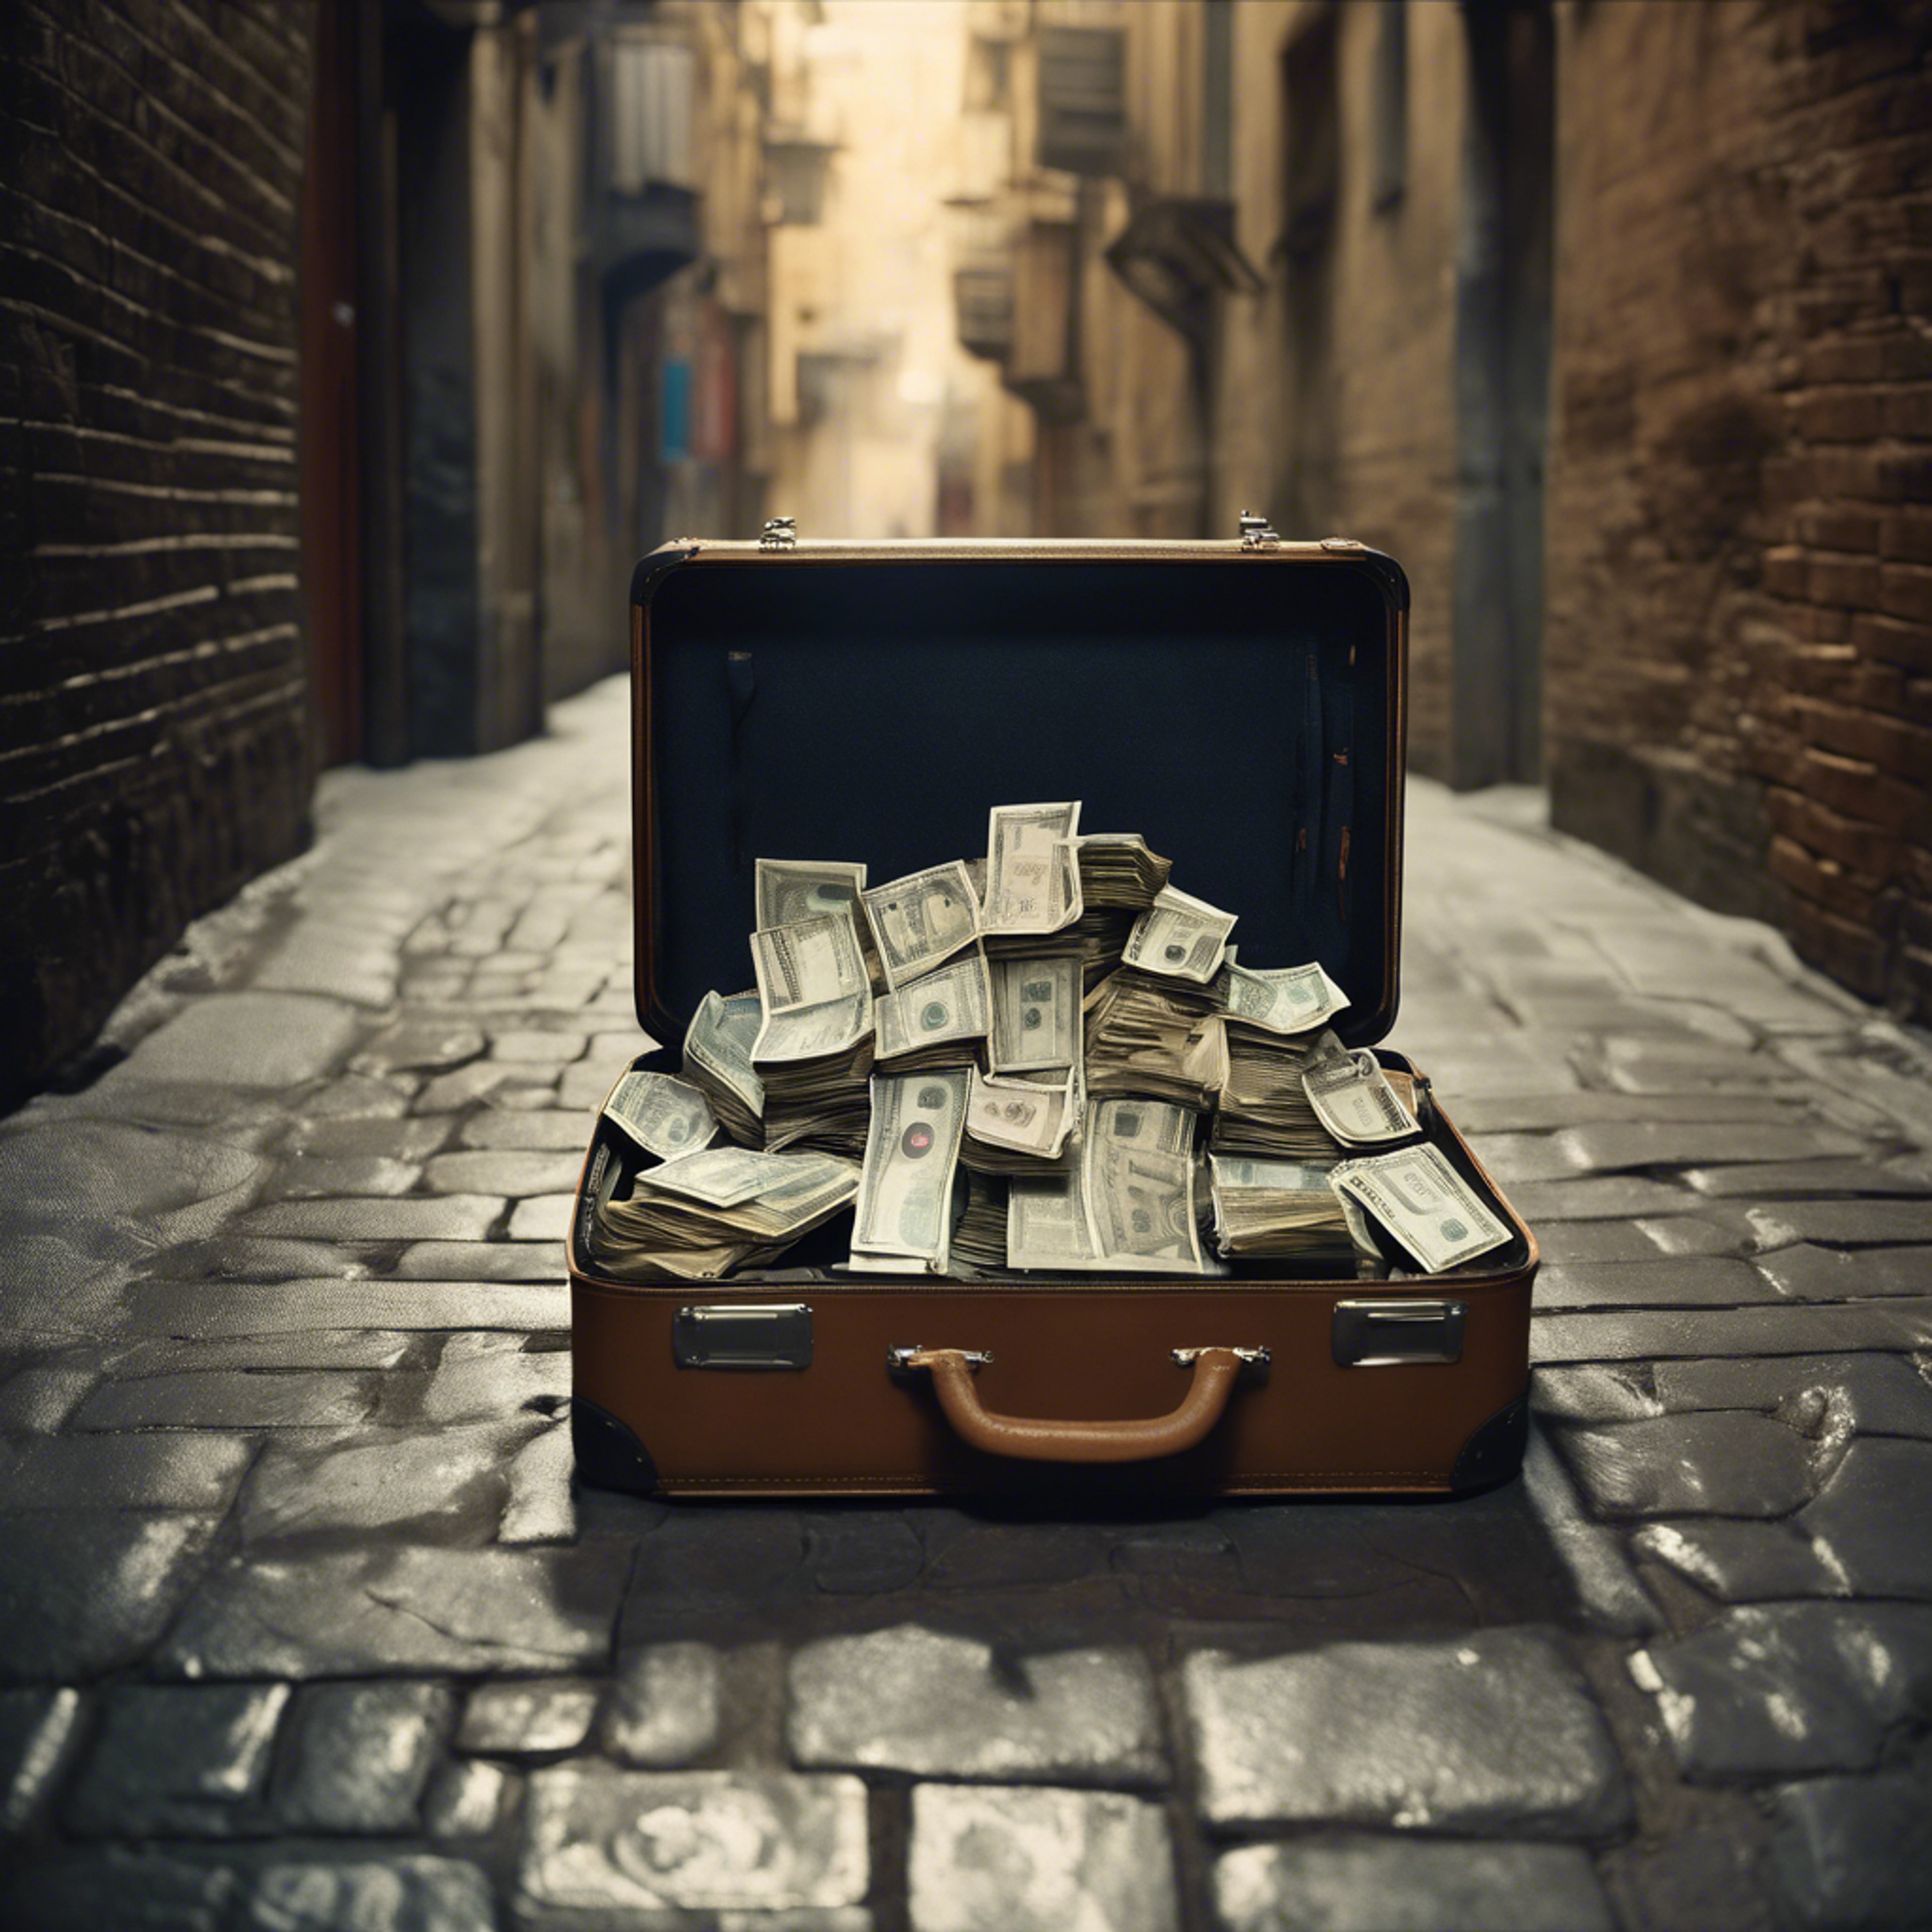 A suitcase filled with mafia money being exchanged in dimly lit alleyway. Дэлгэцийн зураг[001aead7b2c840f5bbce]